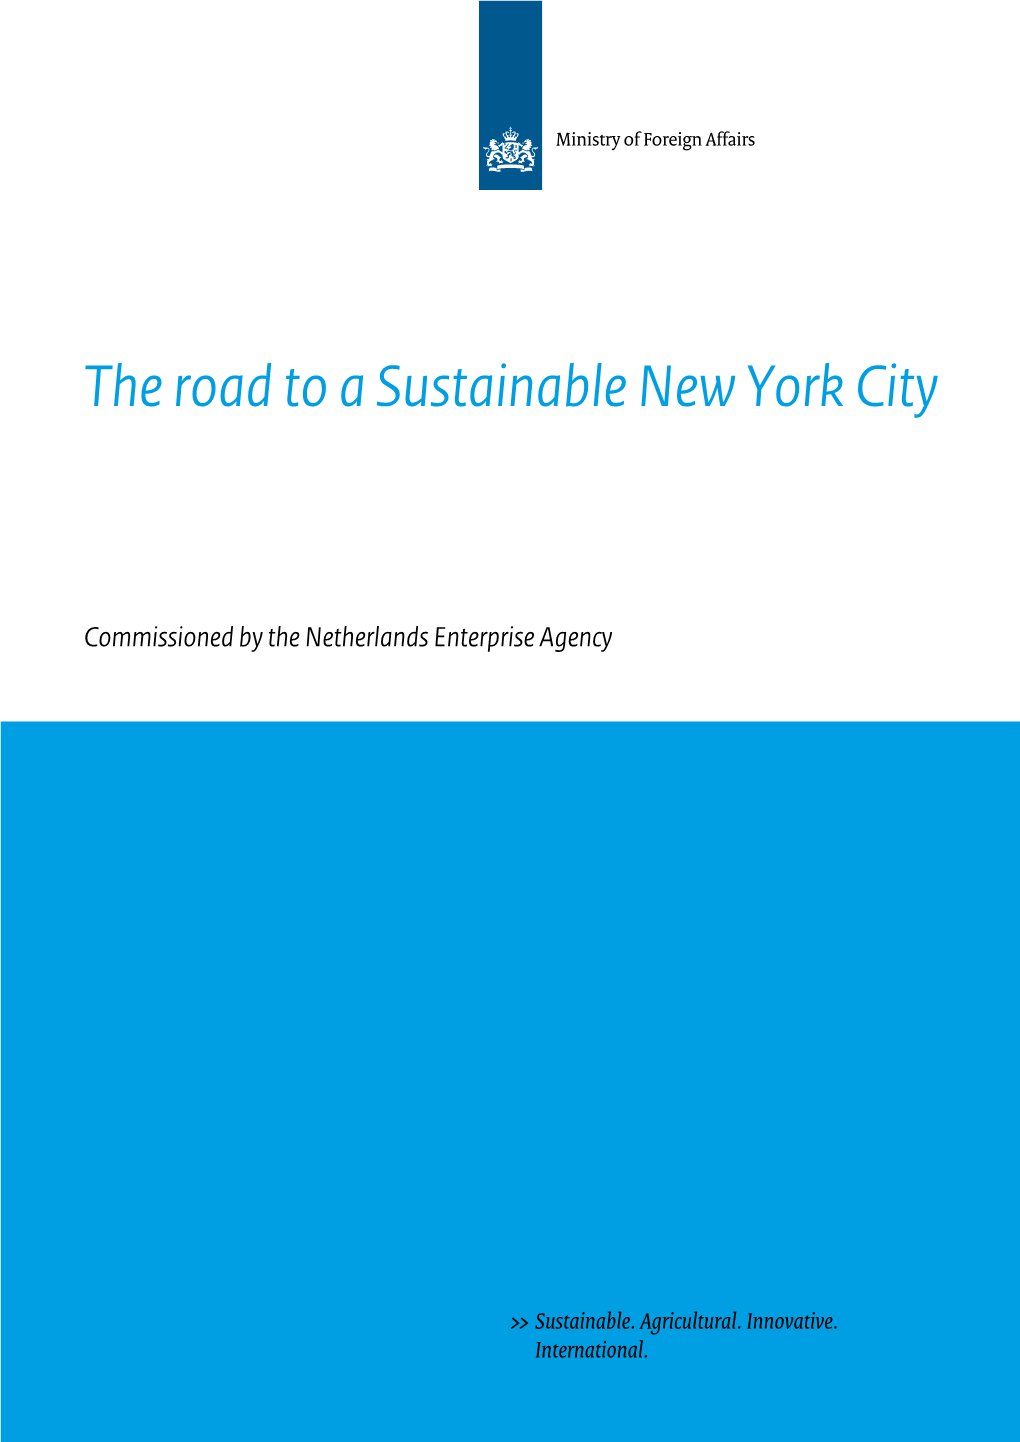 The Road to a Sustainable New York City